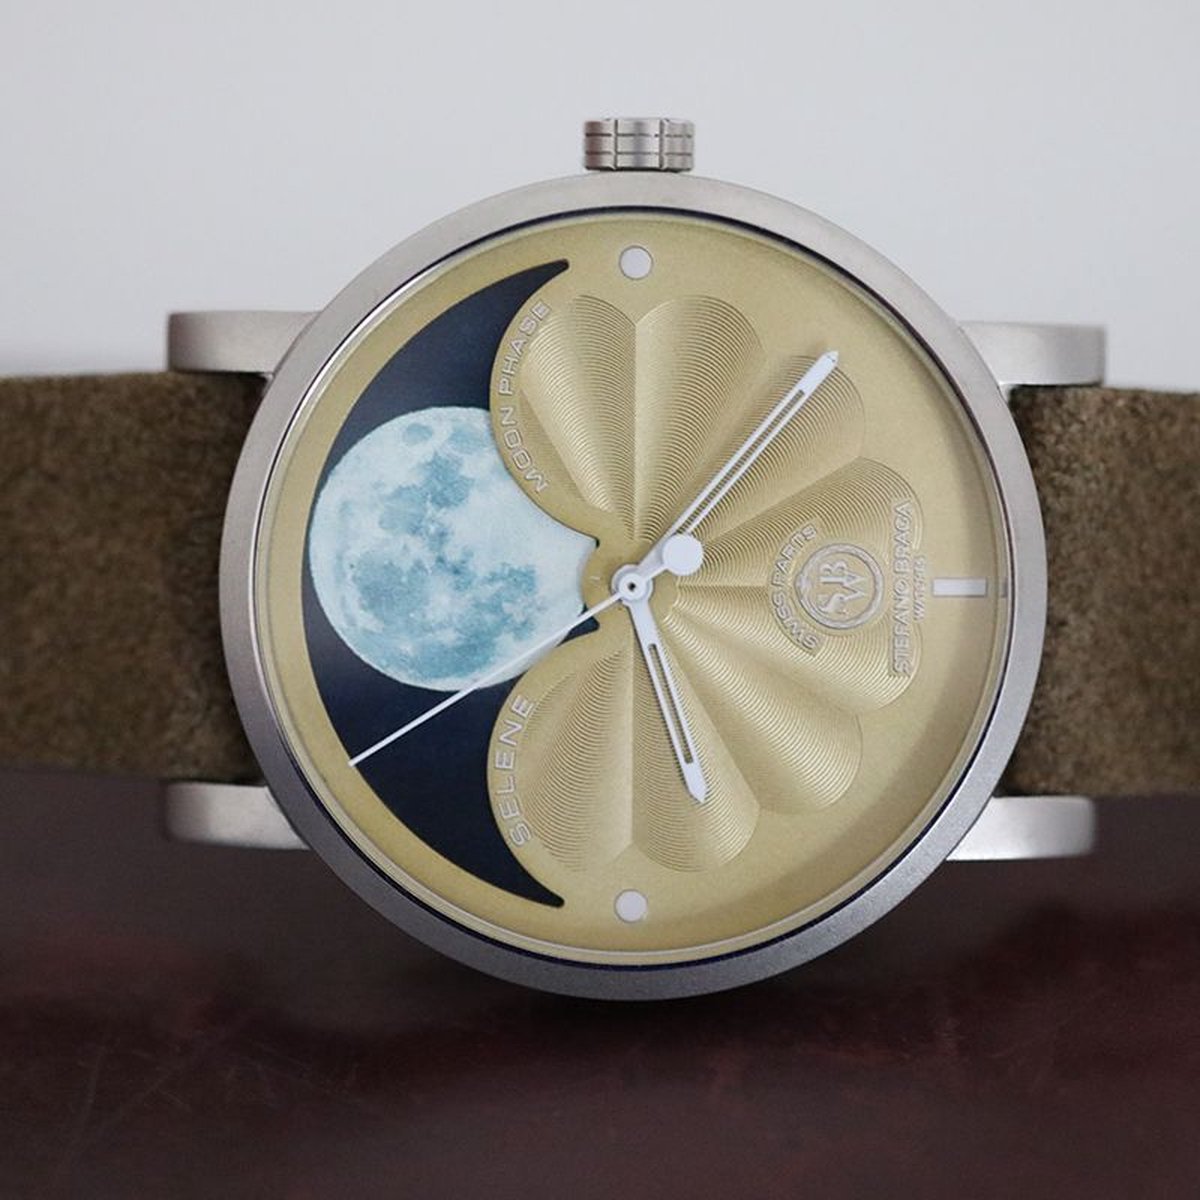 Stefano Braga Watches Swiss Made Hypoallergenic Stainless Steel Watch Selene with Moon Phase